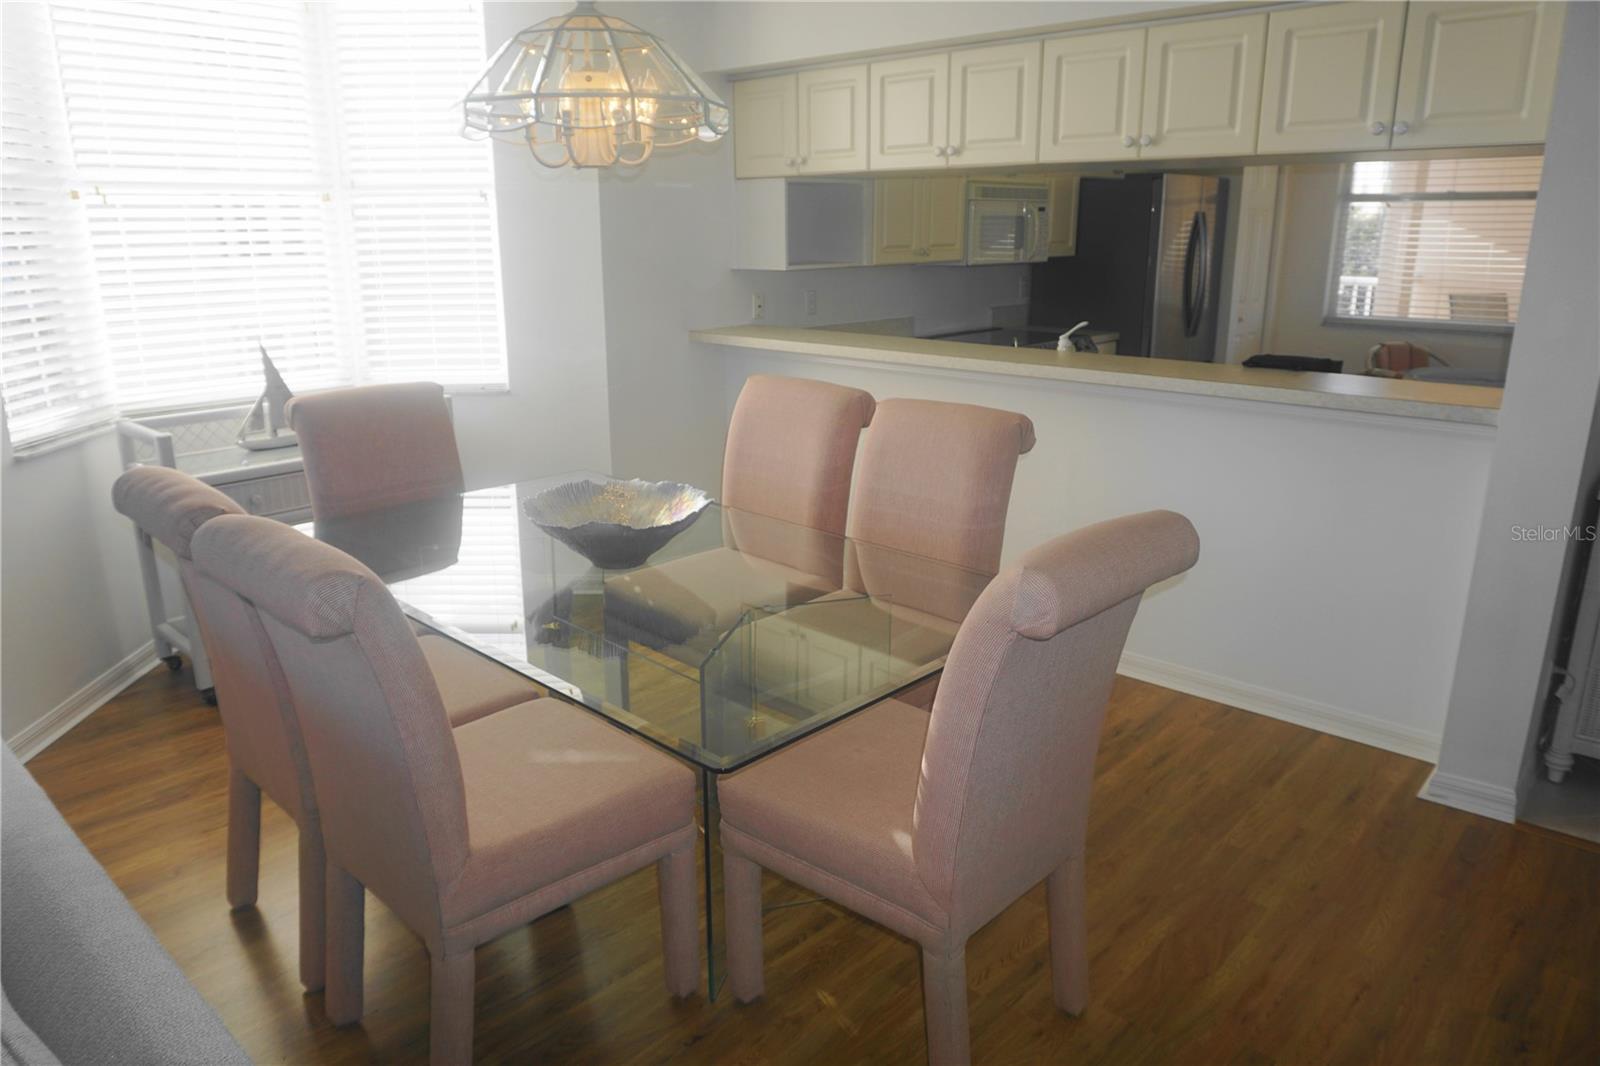 The dining area and bay window include a breakfast bar with accessible cabinets.